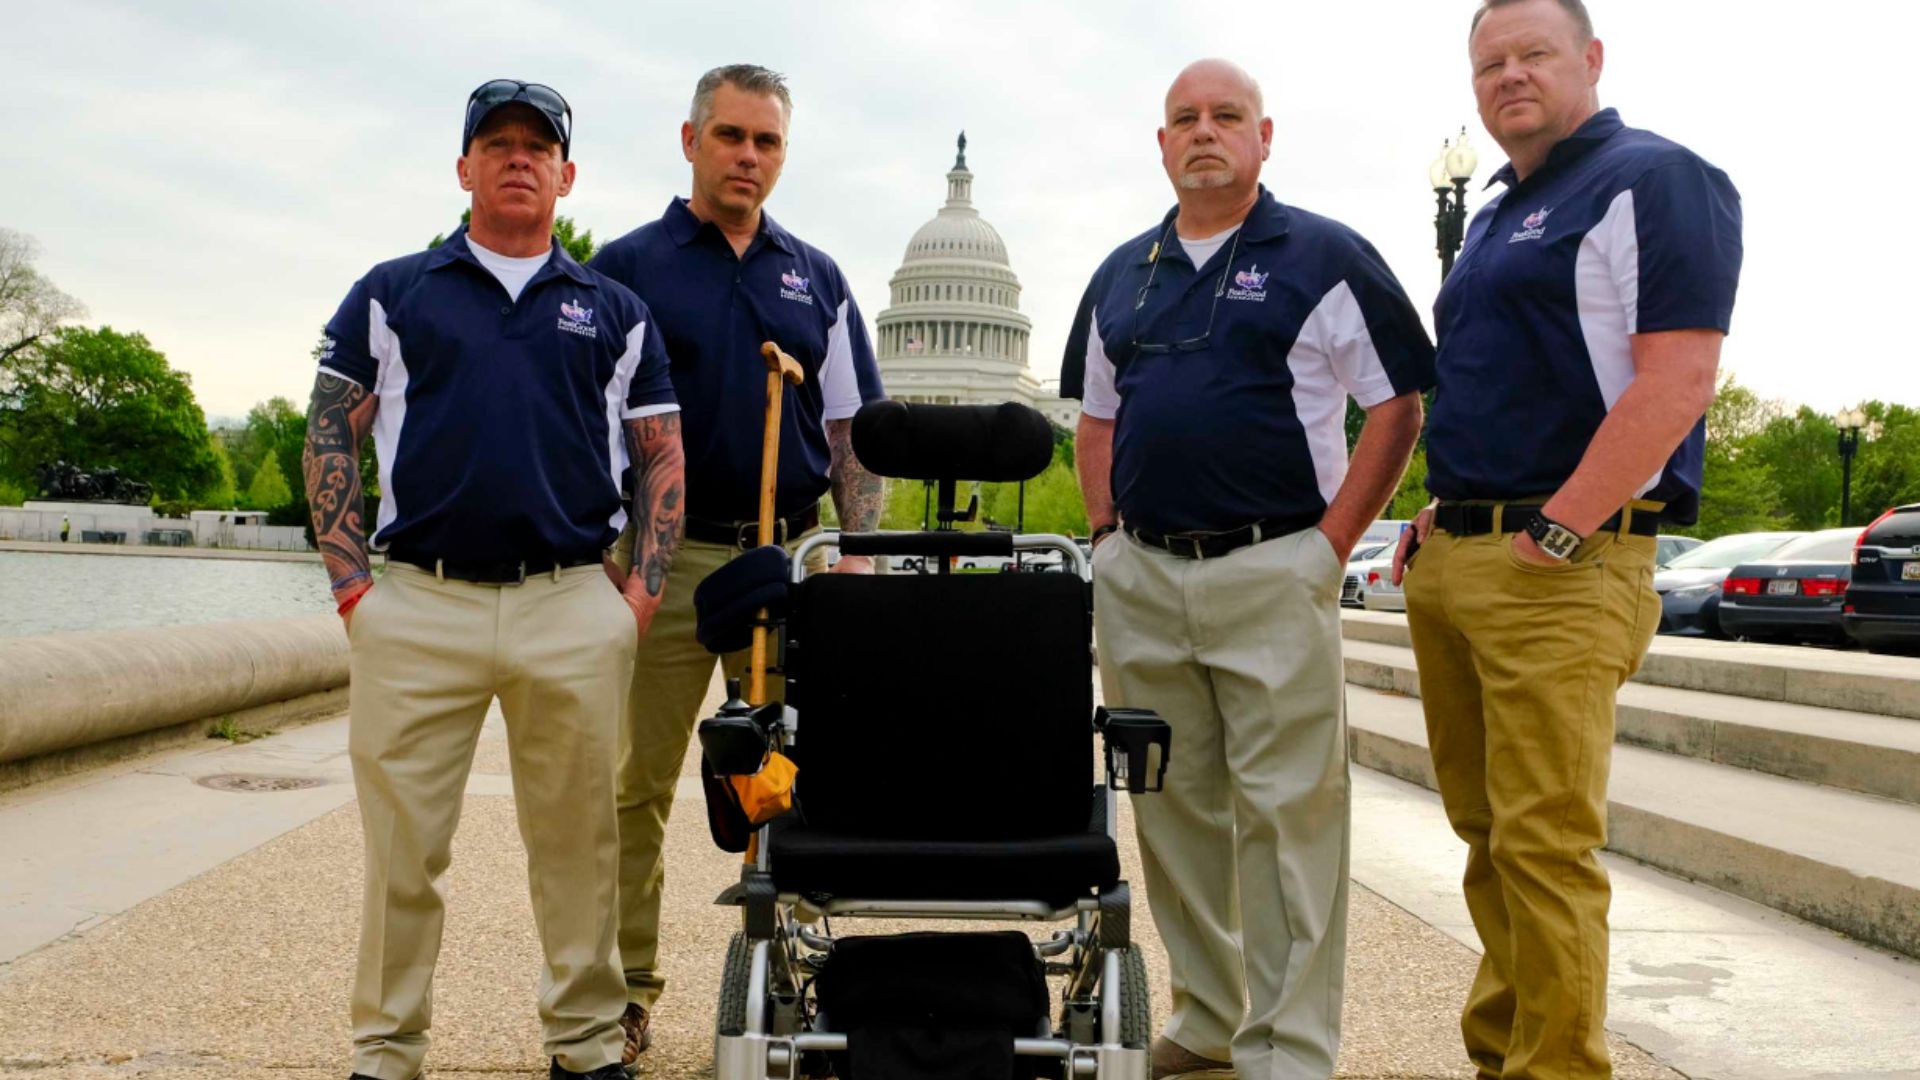 Four men in khaki pants and navy blue shirts stand with an empty wheelchair in front of the U.S. capital building.